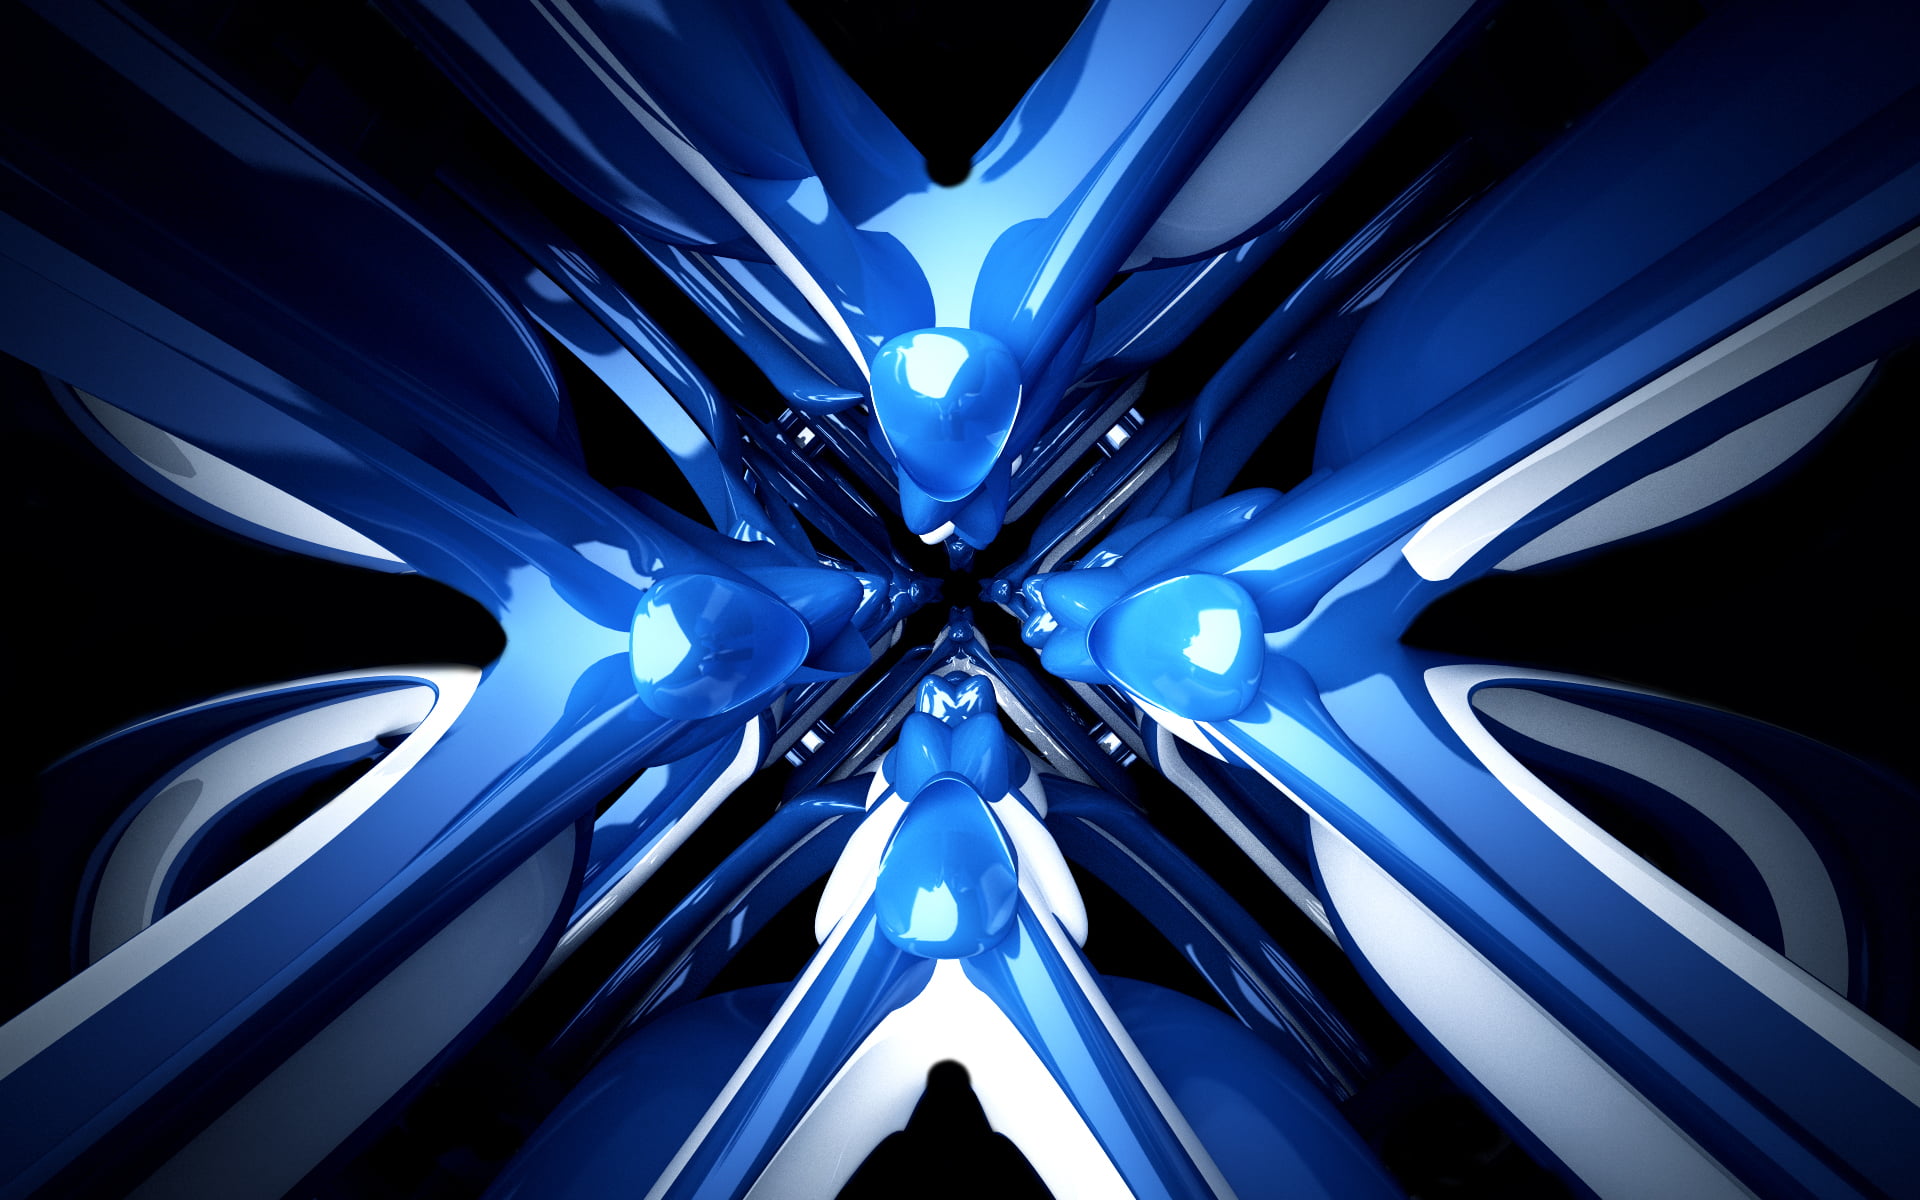 Blue And White Abstract Wallpaper Hd Blue abstract white abstract white ...